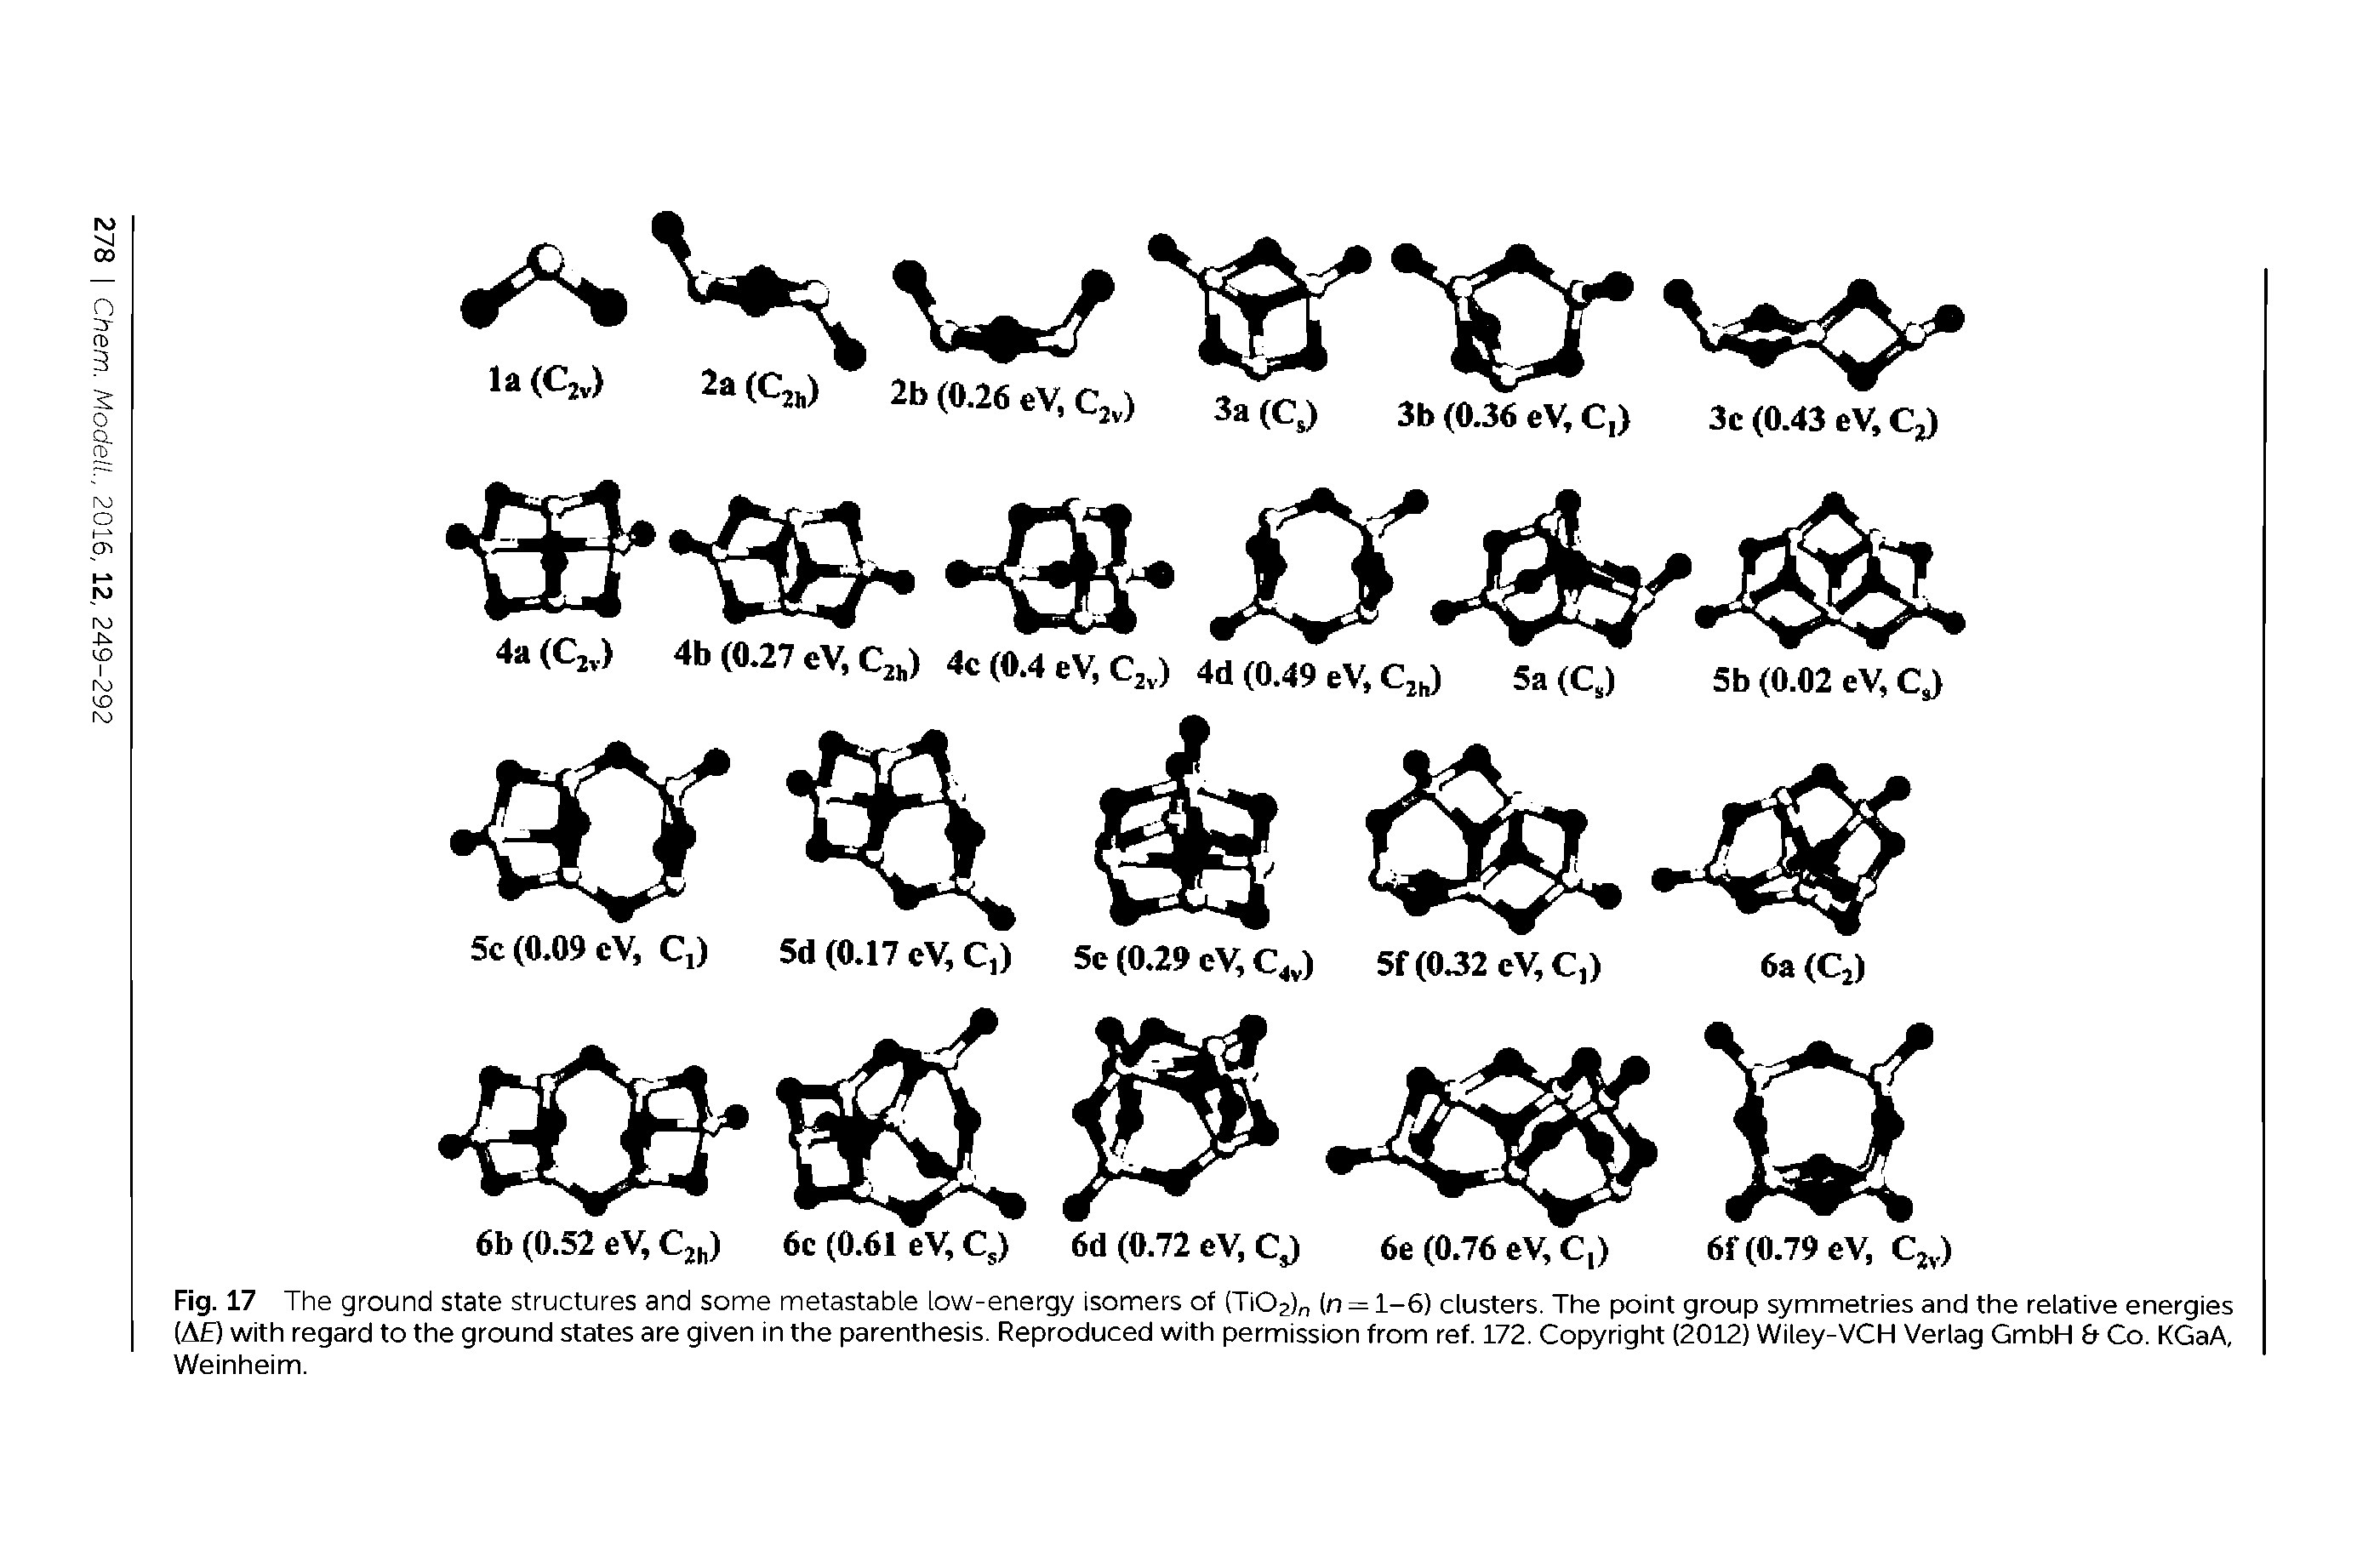 Fig. 17 The ground state structures and some metastable low-energy isomers of (TiOz)n (n = l-6) clusters he point group symmet the relative enei ies (Af) with regard to the ground states are given in the parenthesis. Reproduced with permission from ref. 172. Copyright (2012) Wiley-VCH Verlag GmbH Co. KGaA, Weinheim.